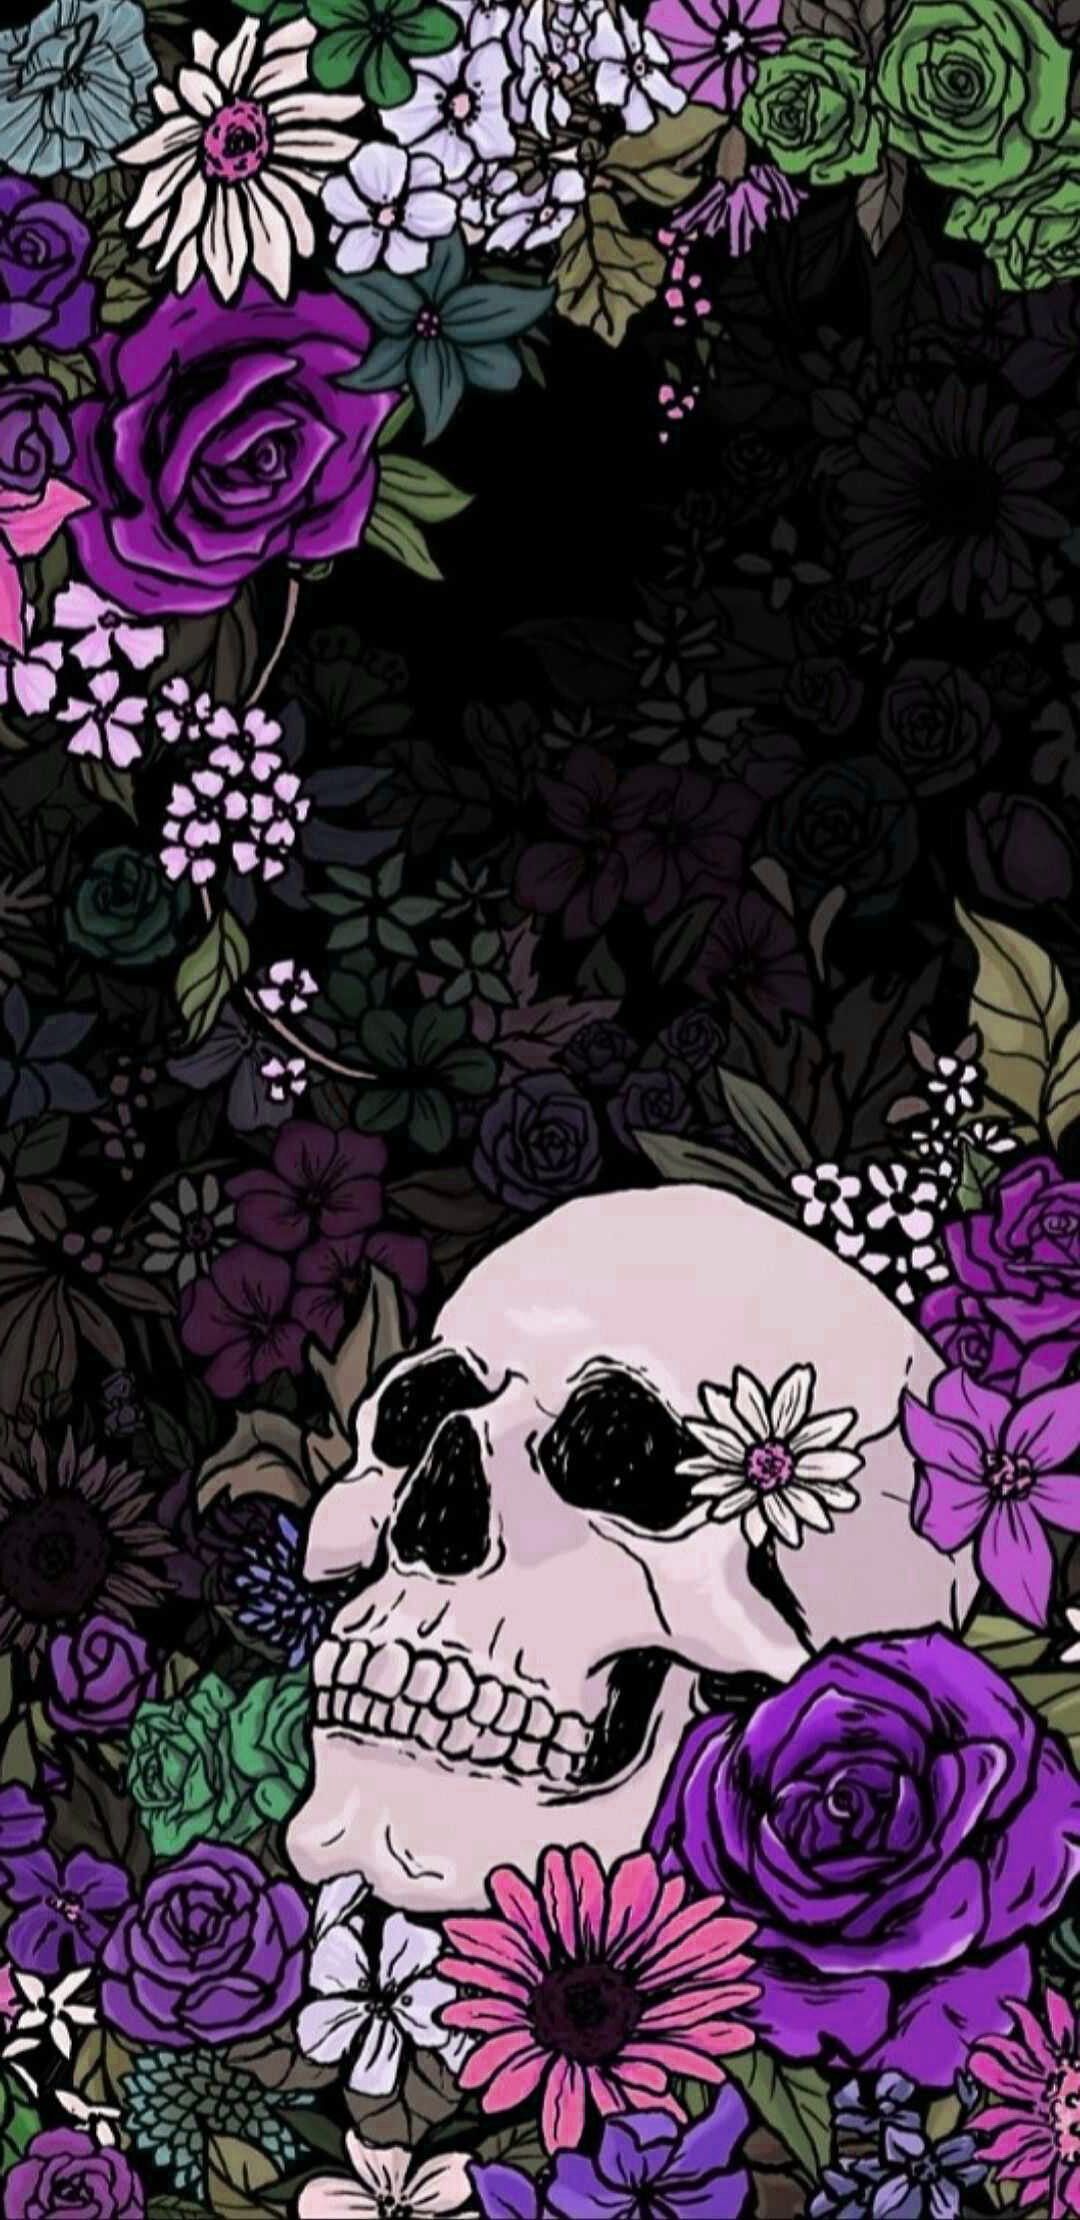 IPhone wallpaper with skull and flowers - Skeleton